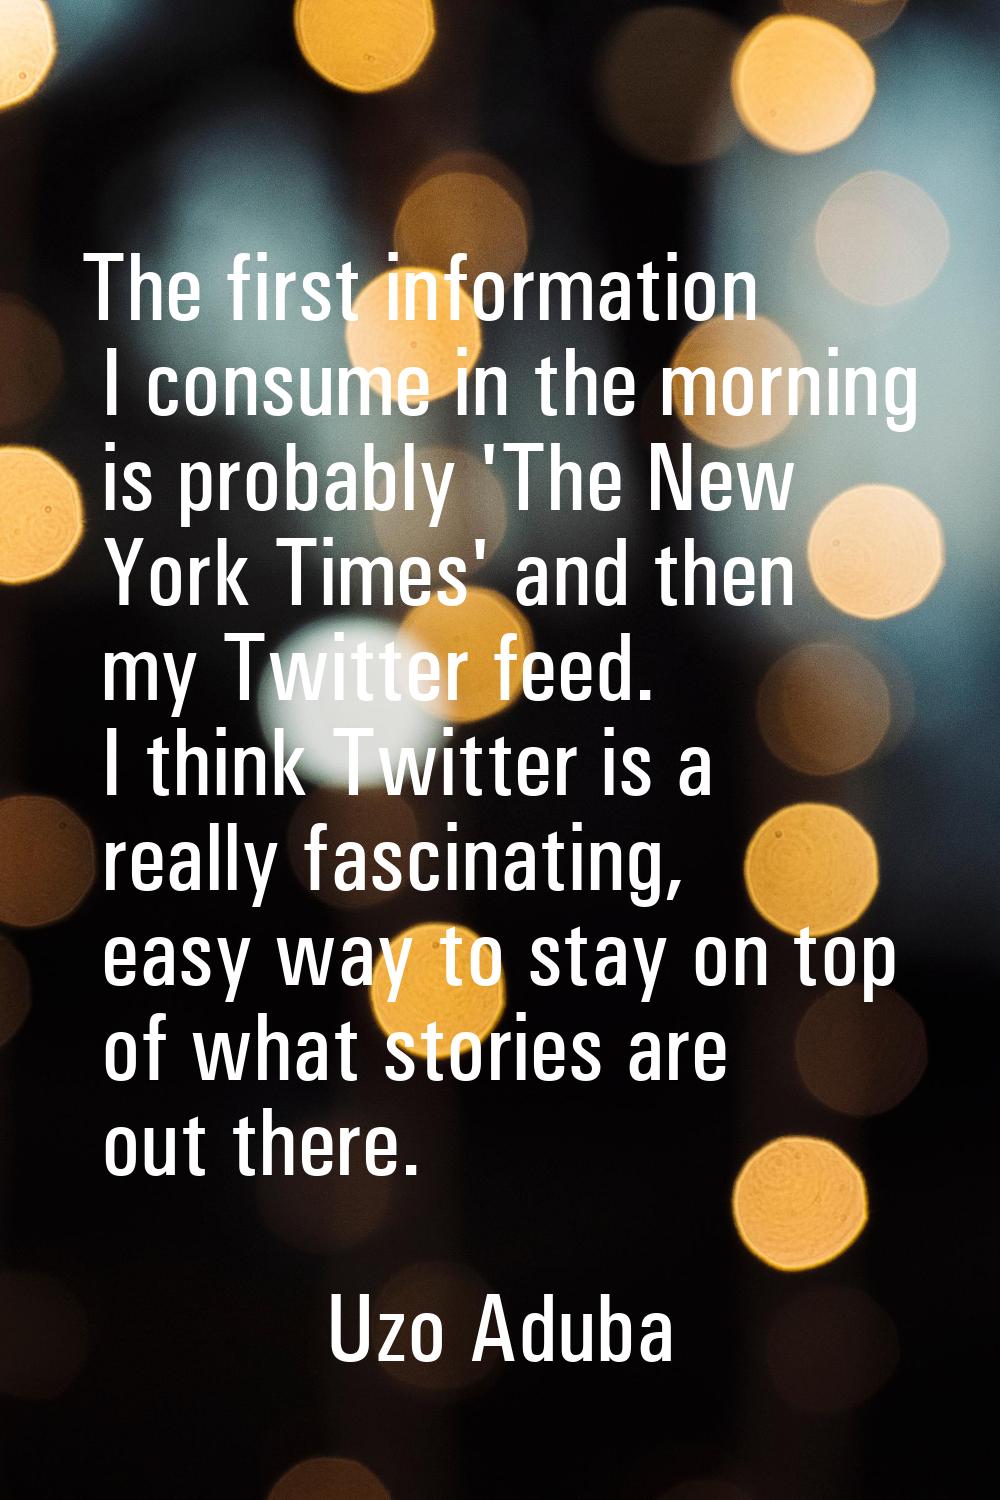 The first information I consume in the morning is probably 'The New York Times' and then my Twitter